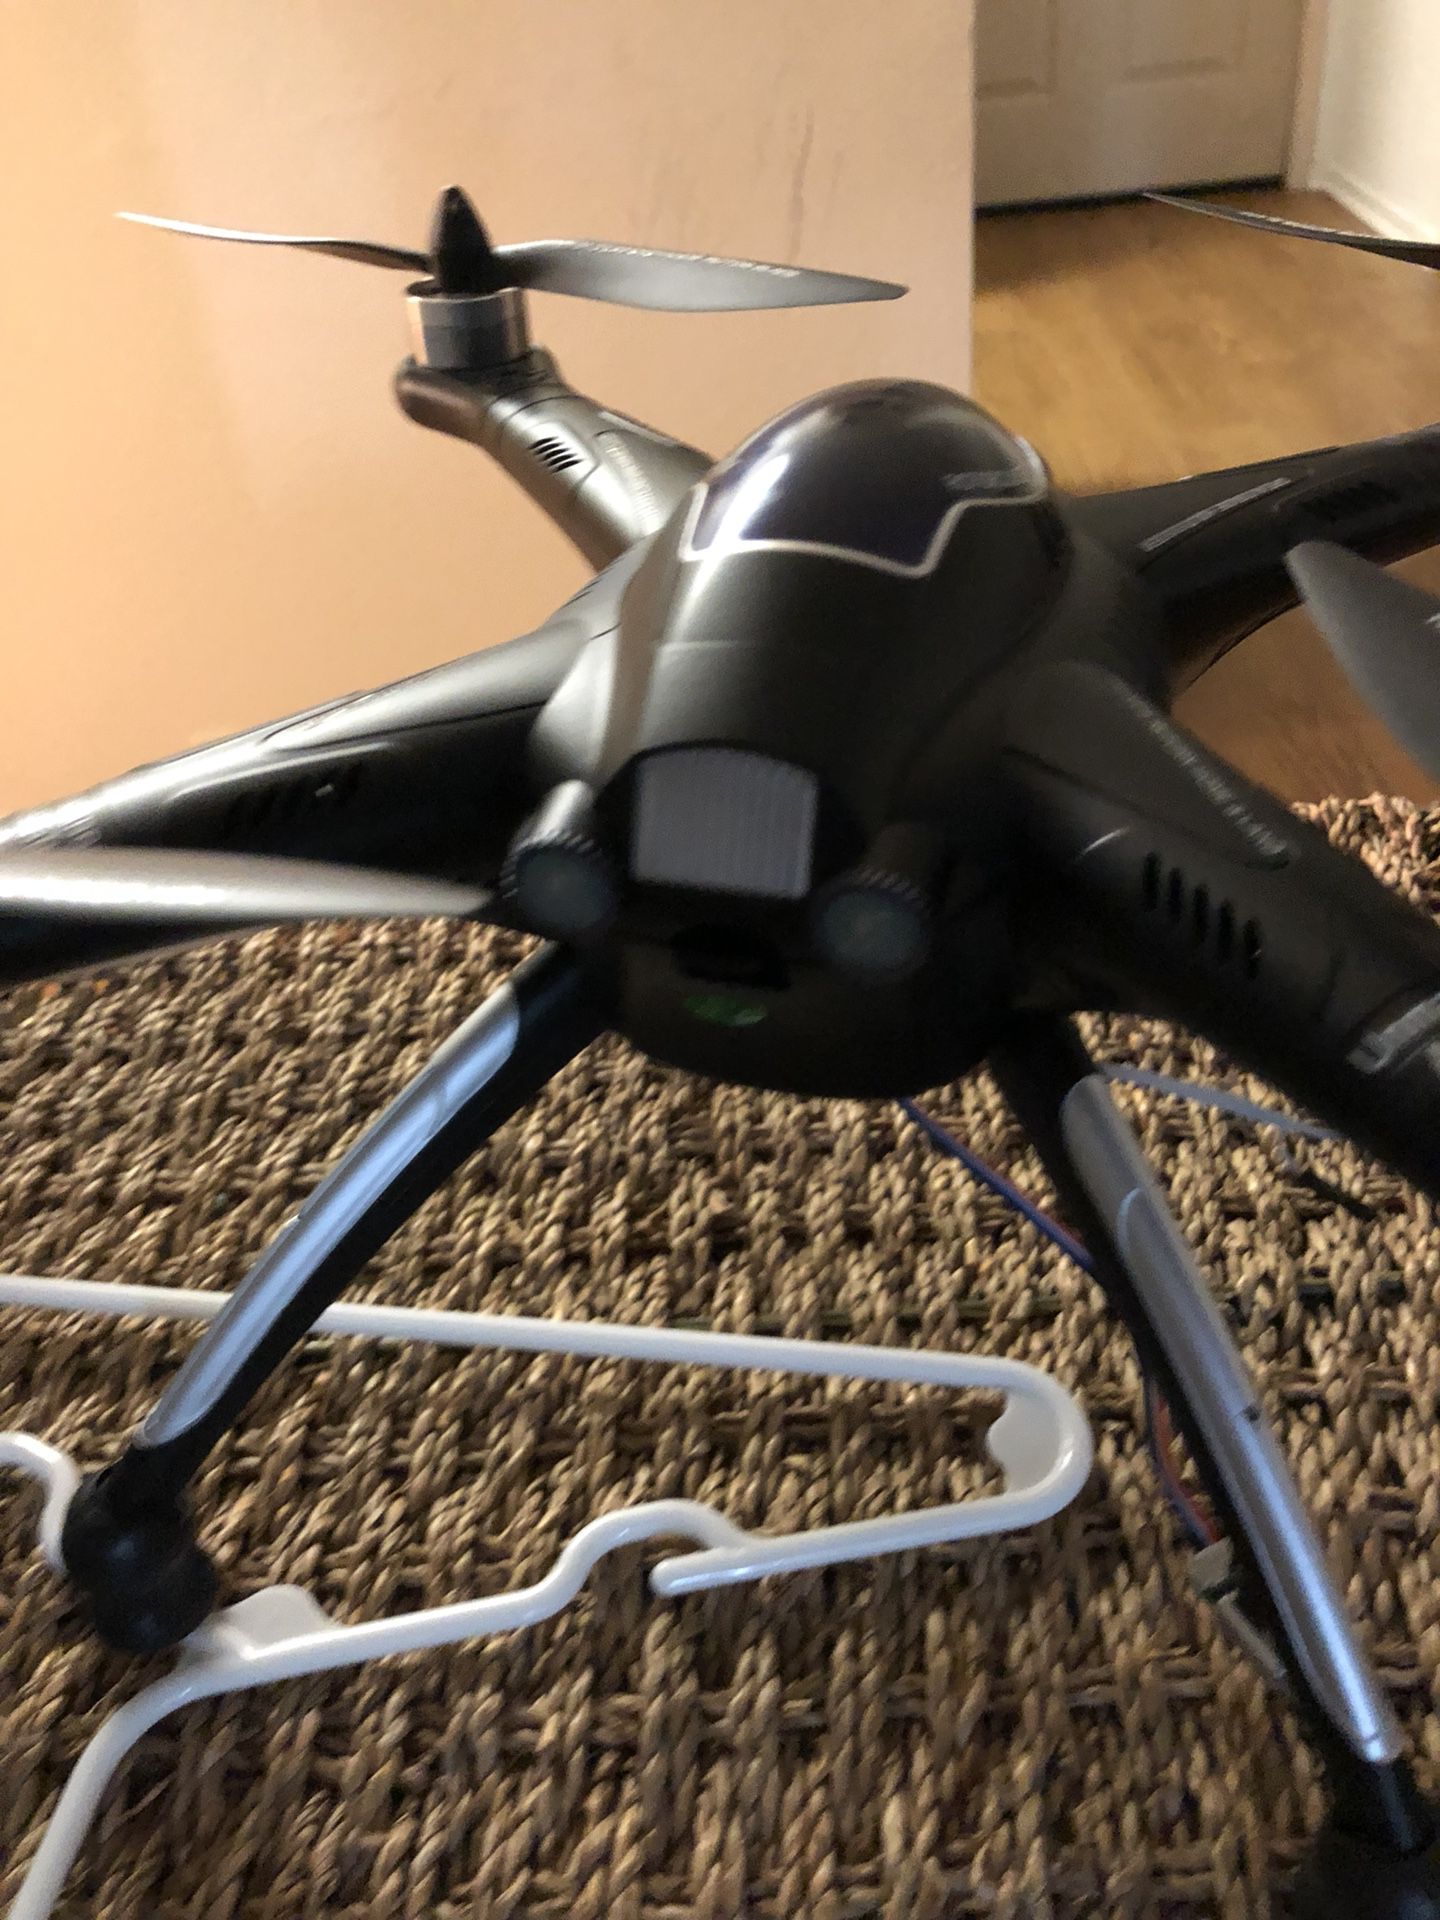 Drone new in box missing camera